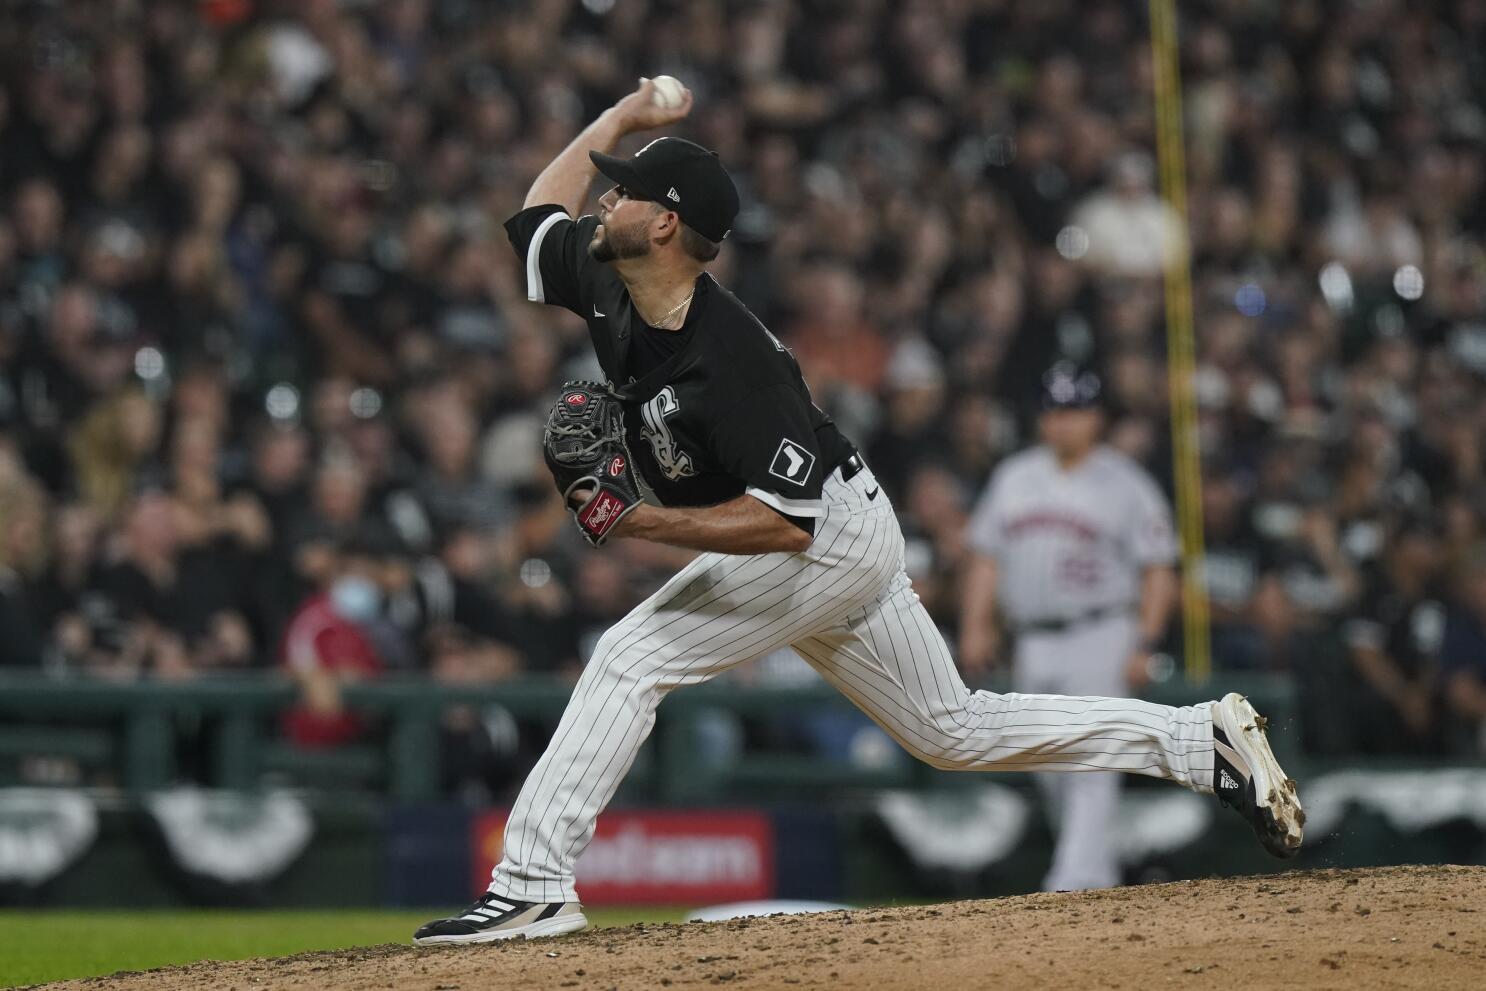 White Sox reliever implies Astros may be stealing signs - The San